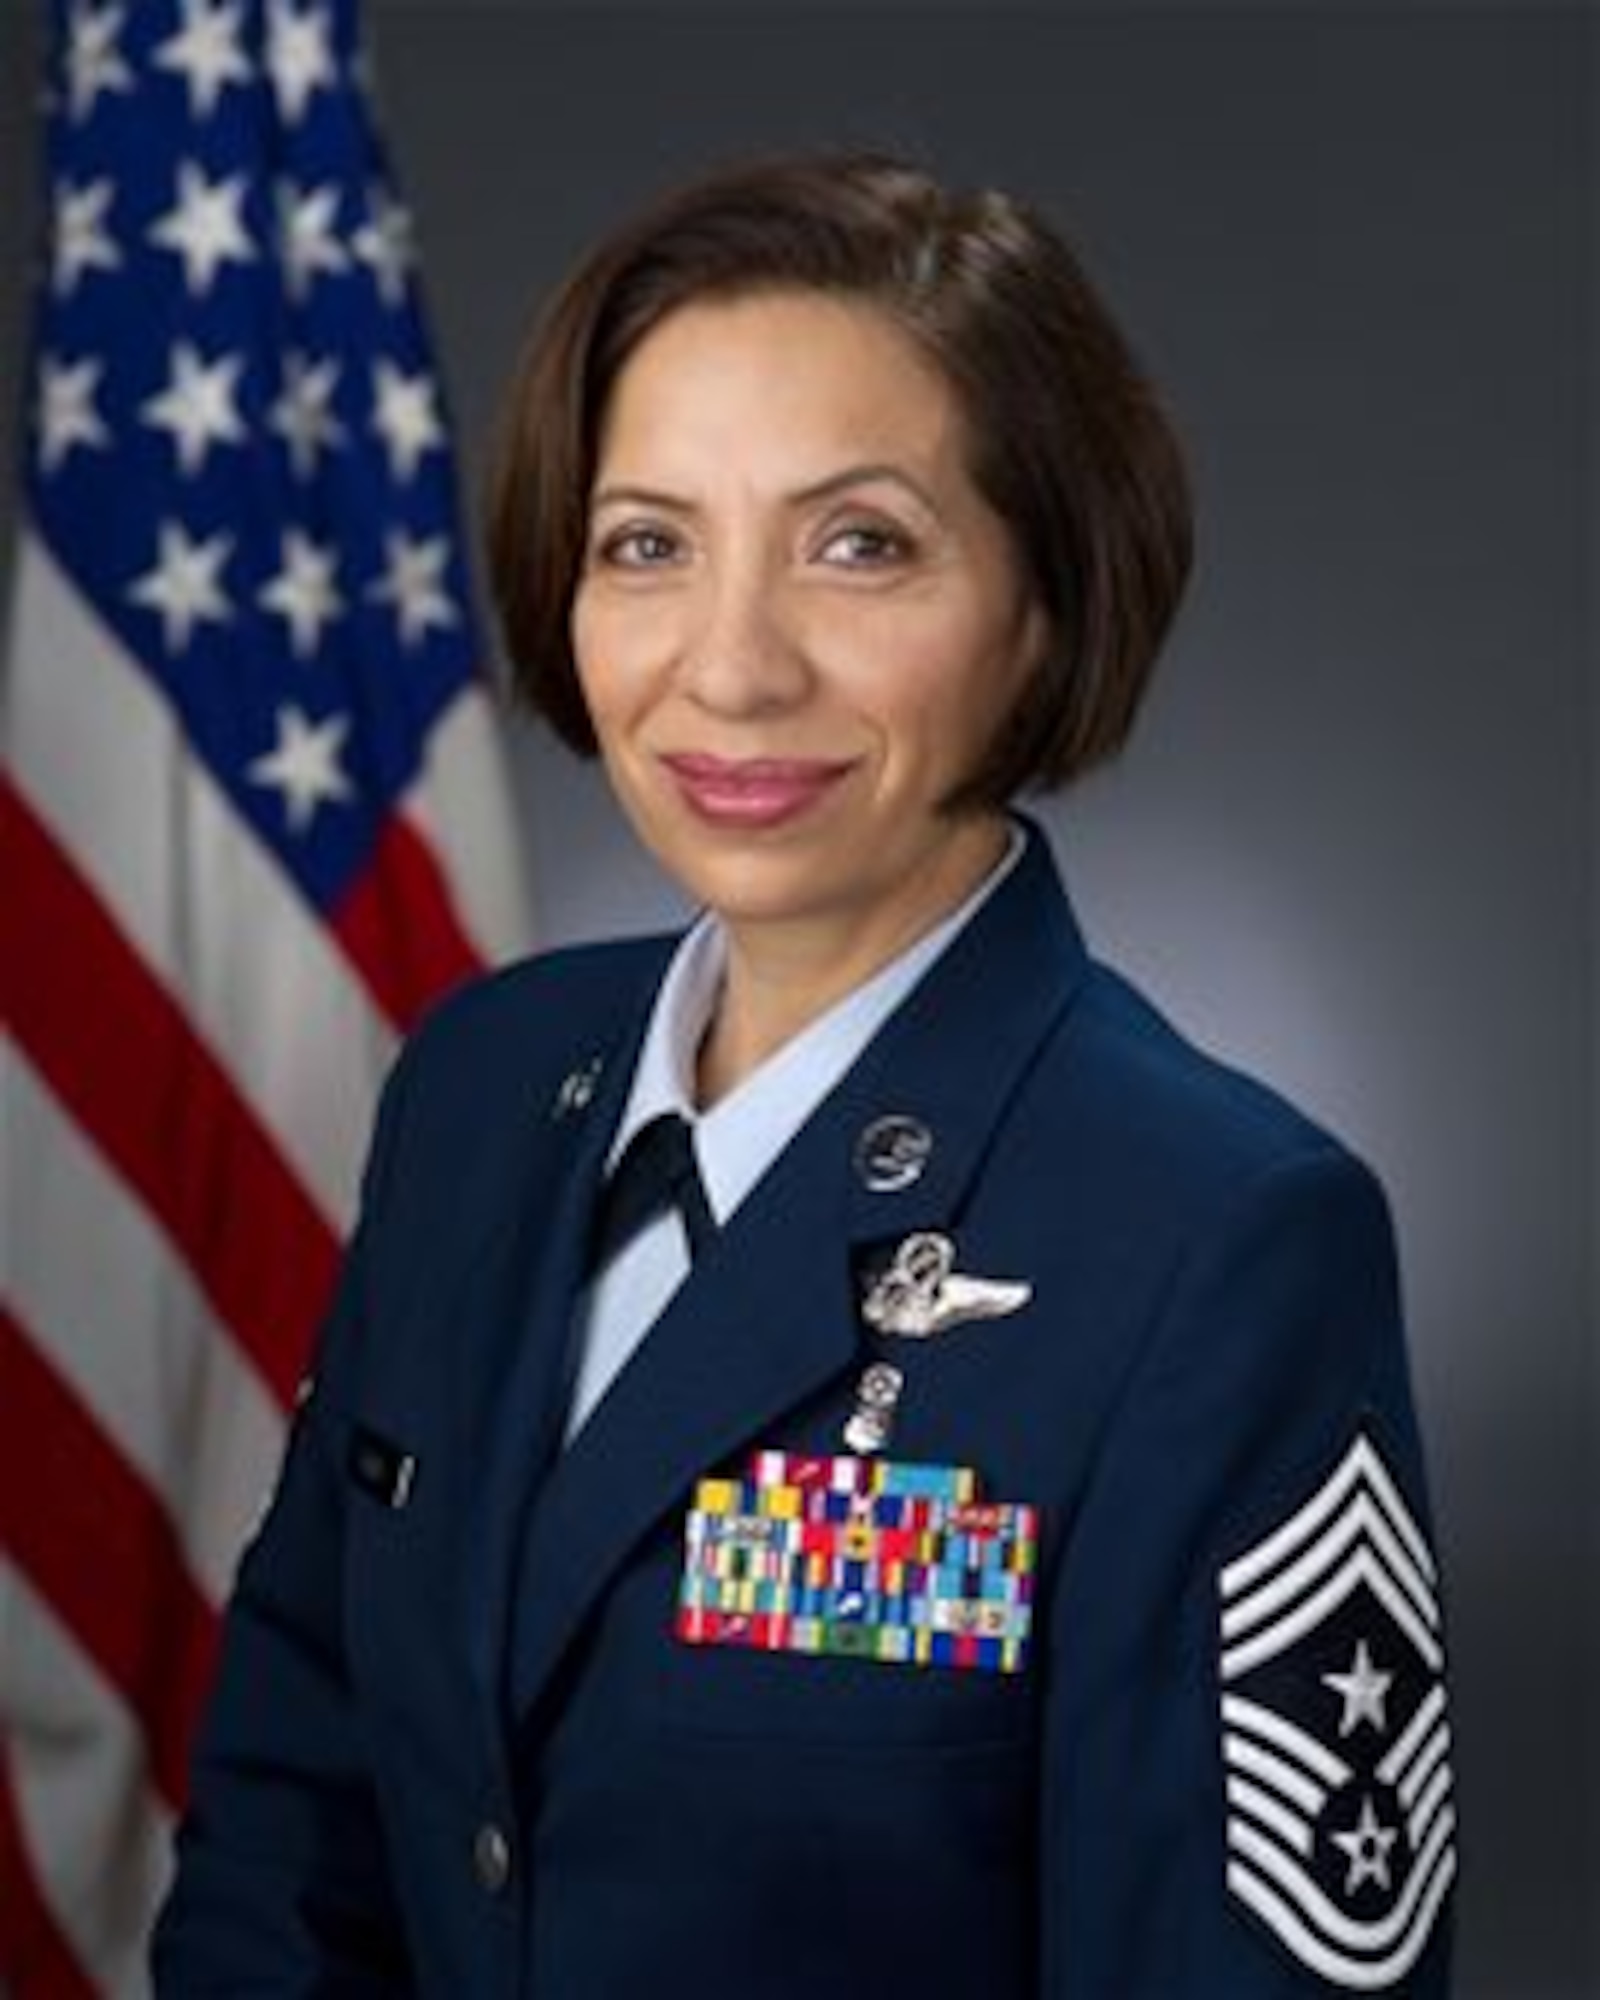 Chief Master Sgt. Erika Kelly has been selected as the new Command Chief for Air Force Reserve Command, replacing Chief Cameron Kirksey as the command's senior enlisted non-commissioned officer. Kelly is currently the command chief for the 349th Air Mobility Wing, Travis Air Force Base, California.